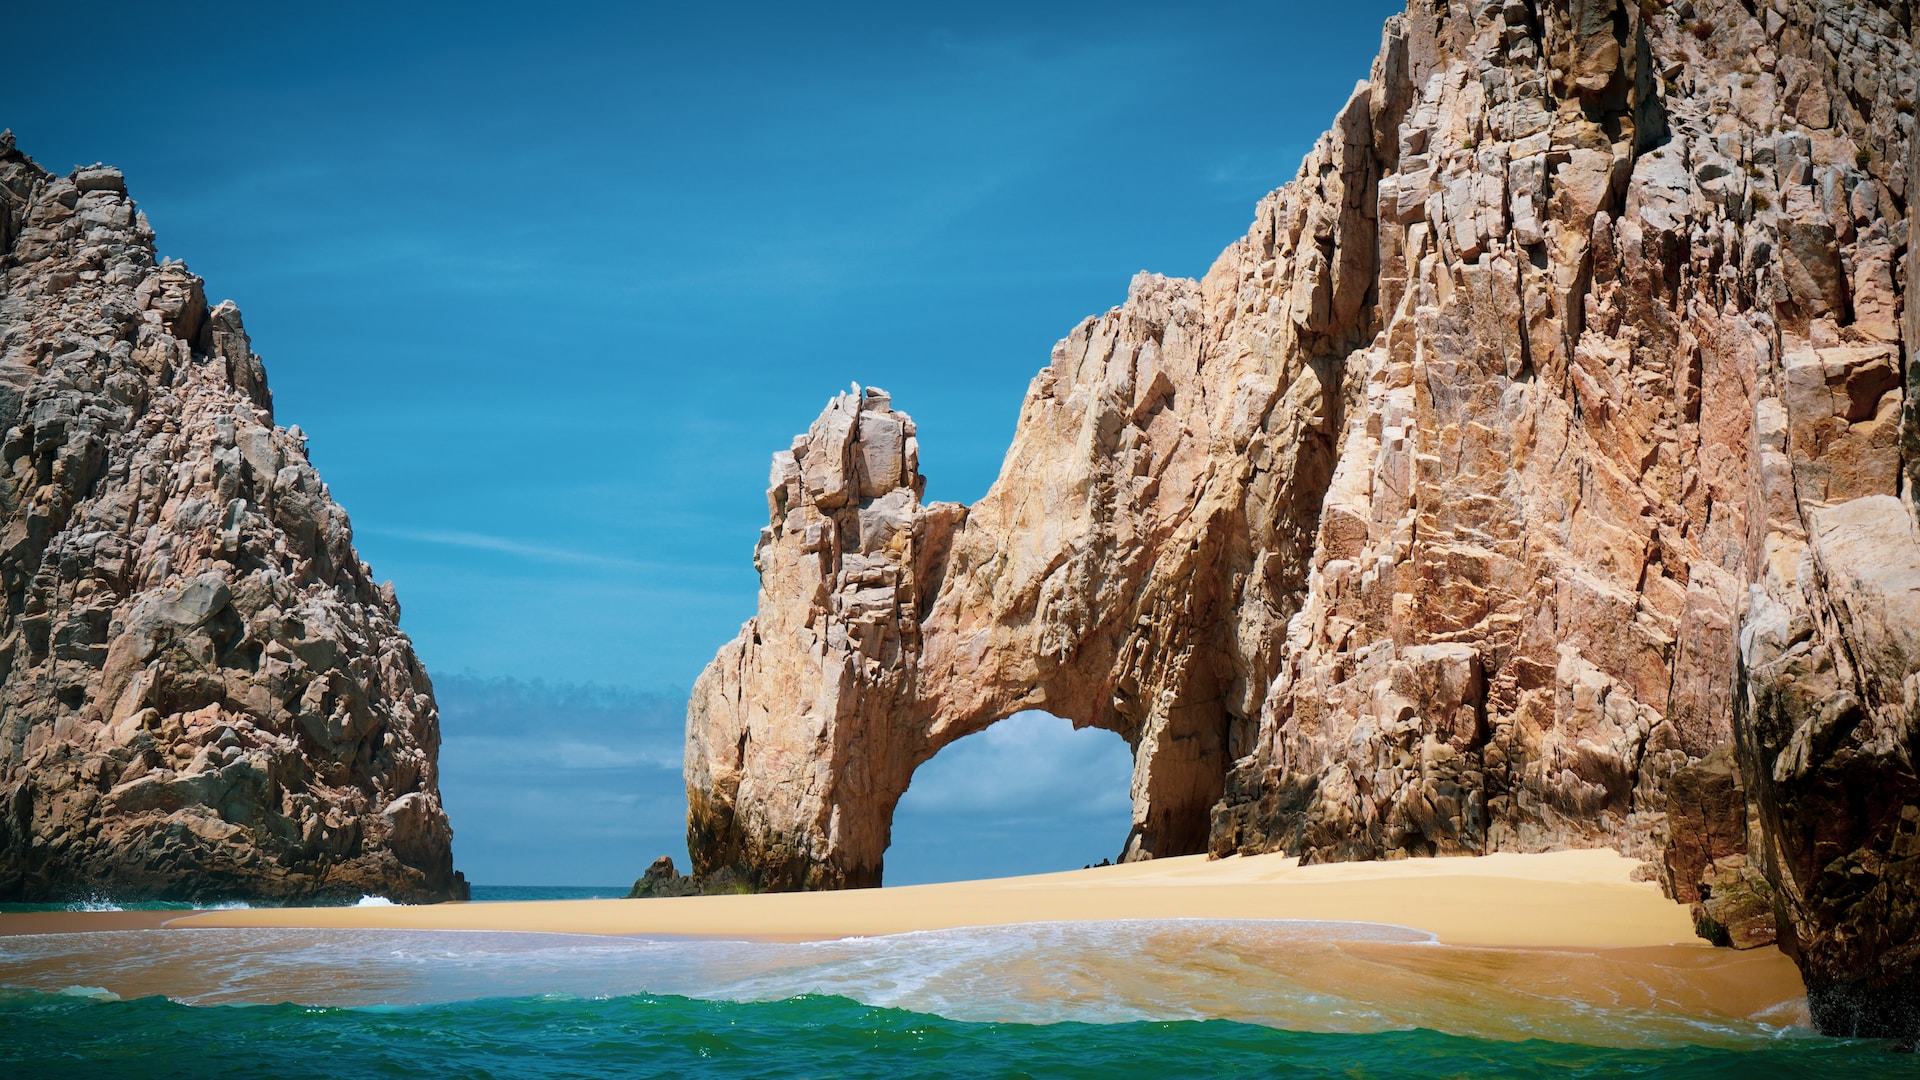 image of the Arch of Cabo San Lucas in Los Cabos